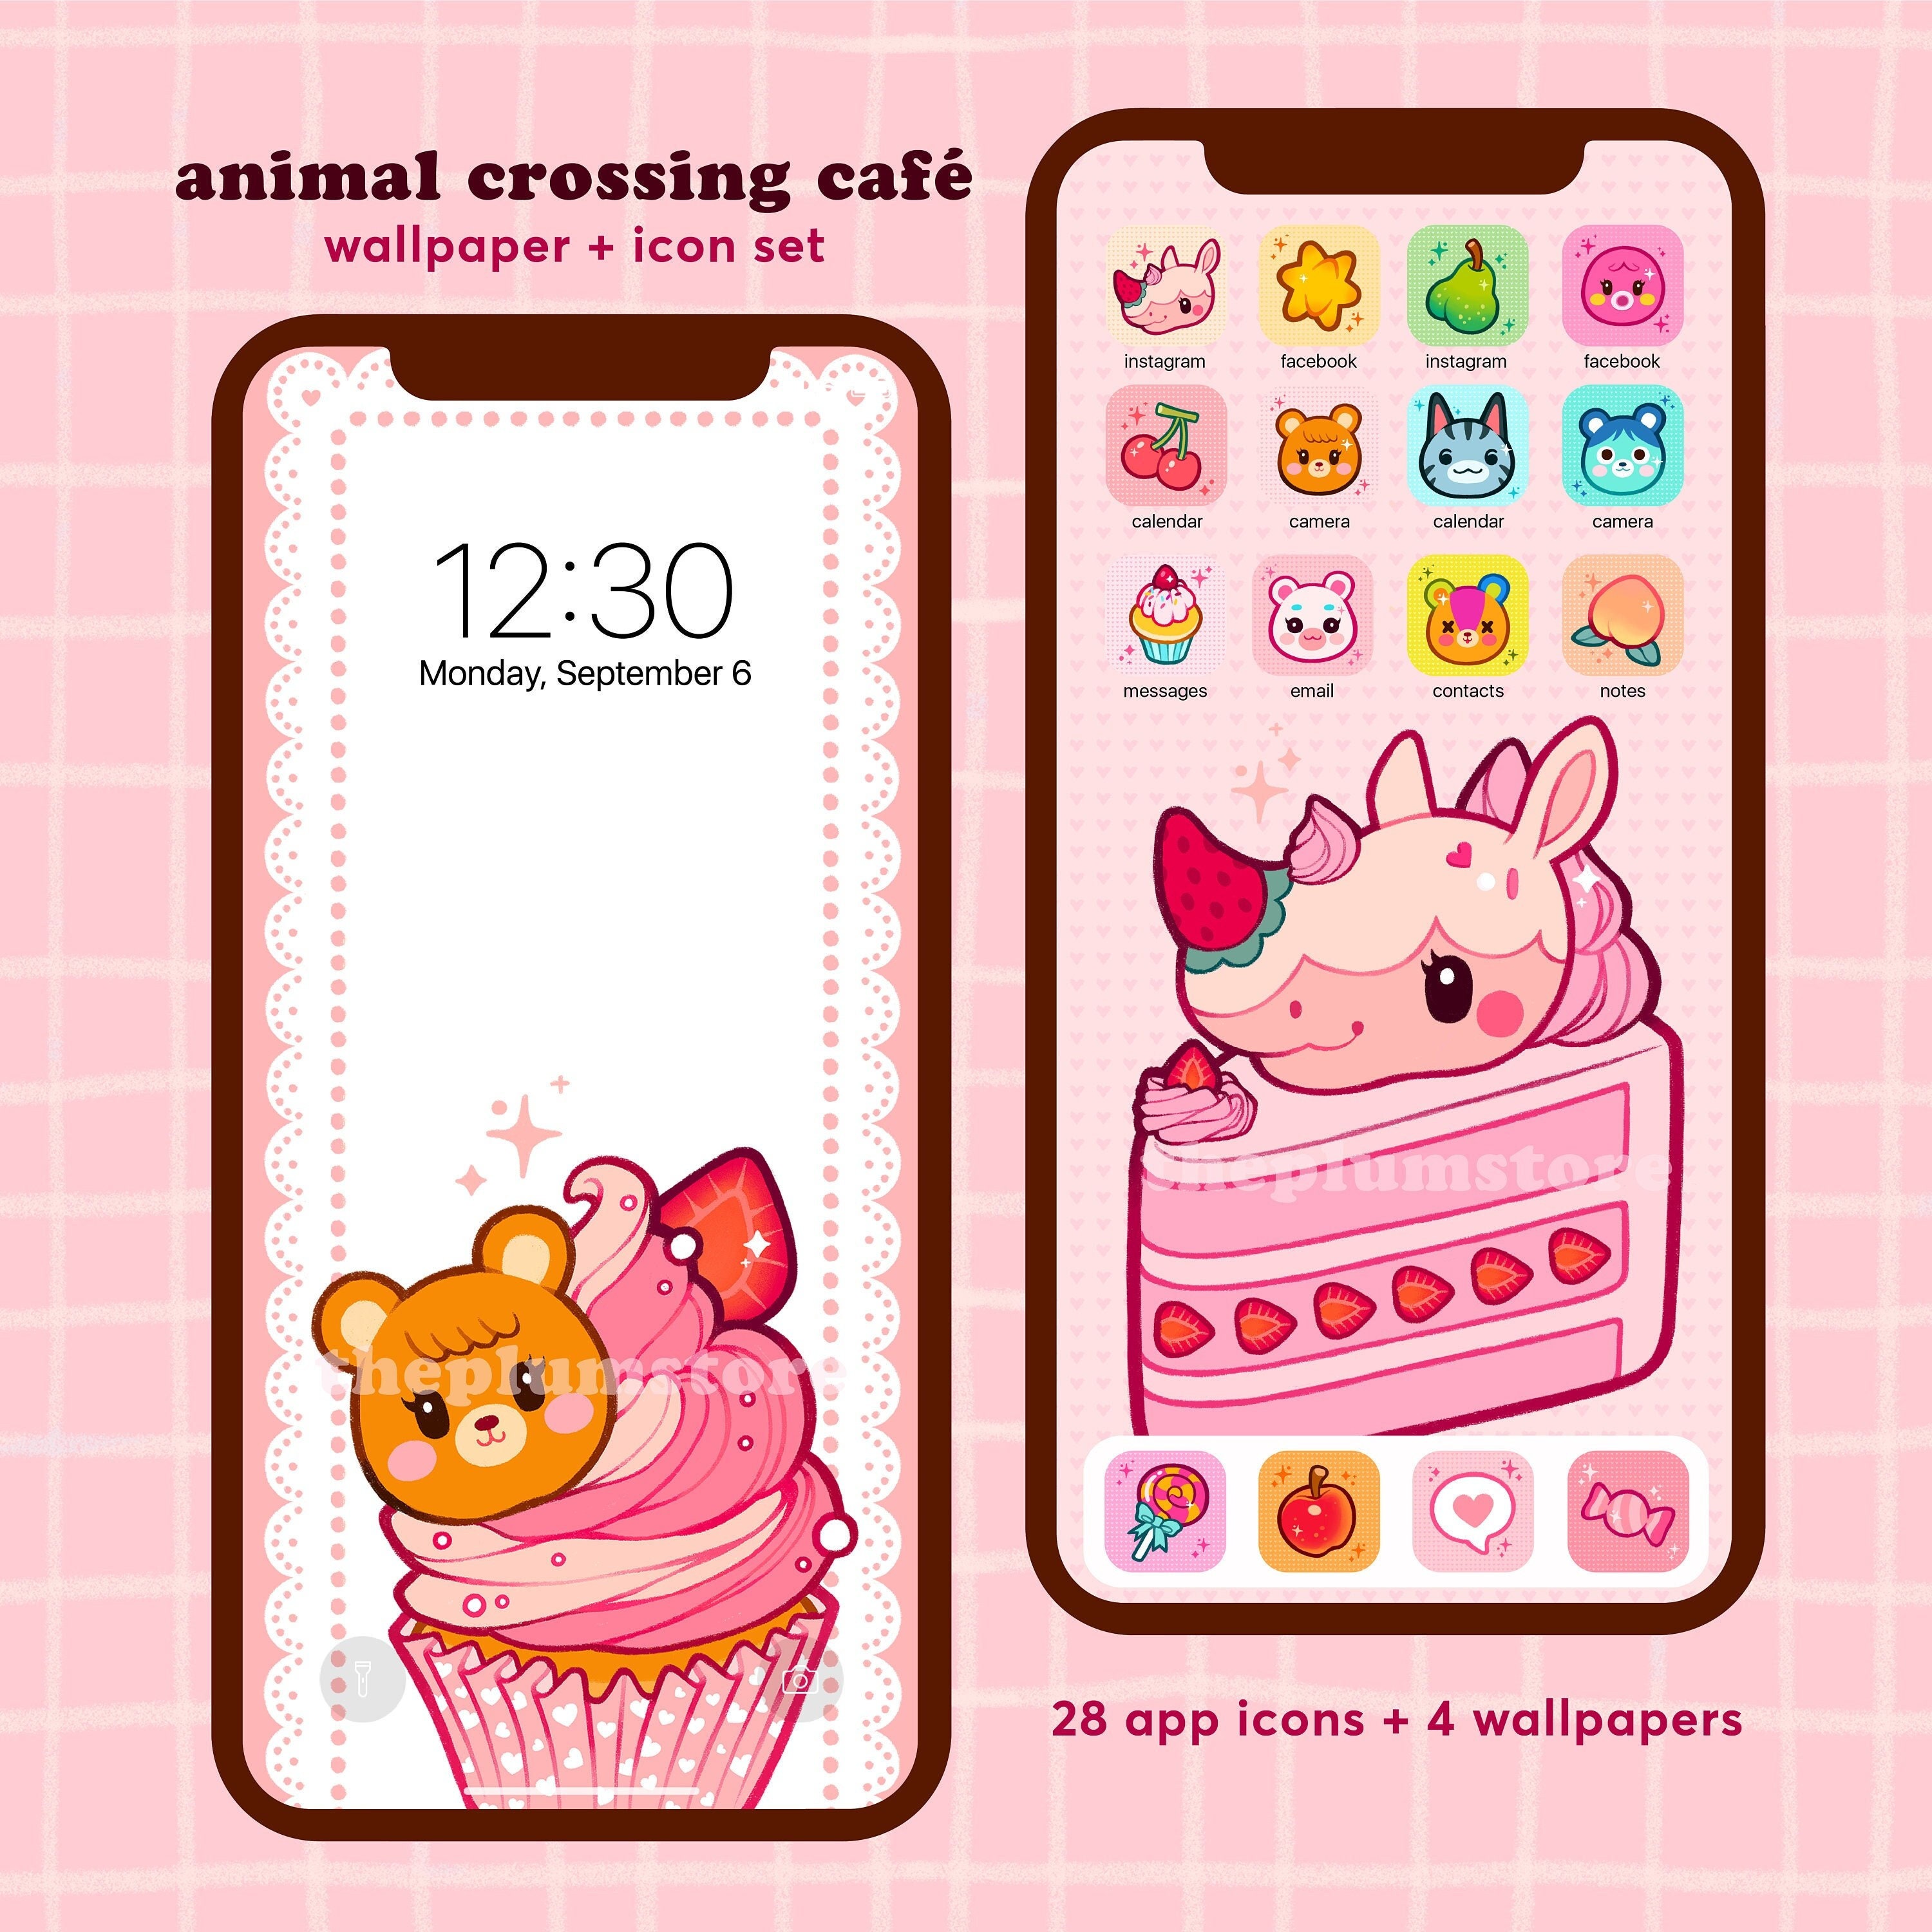 110 Animal crossing wallpapers ideas in 2023  animal crossing animal  crossing fan art animal crossing game